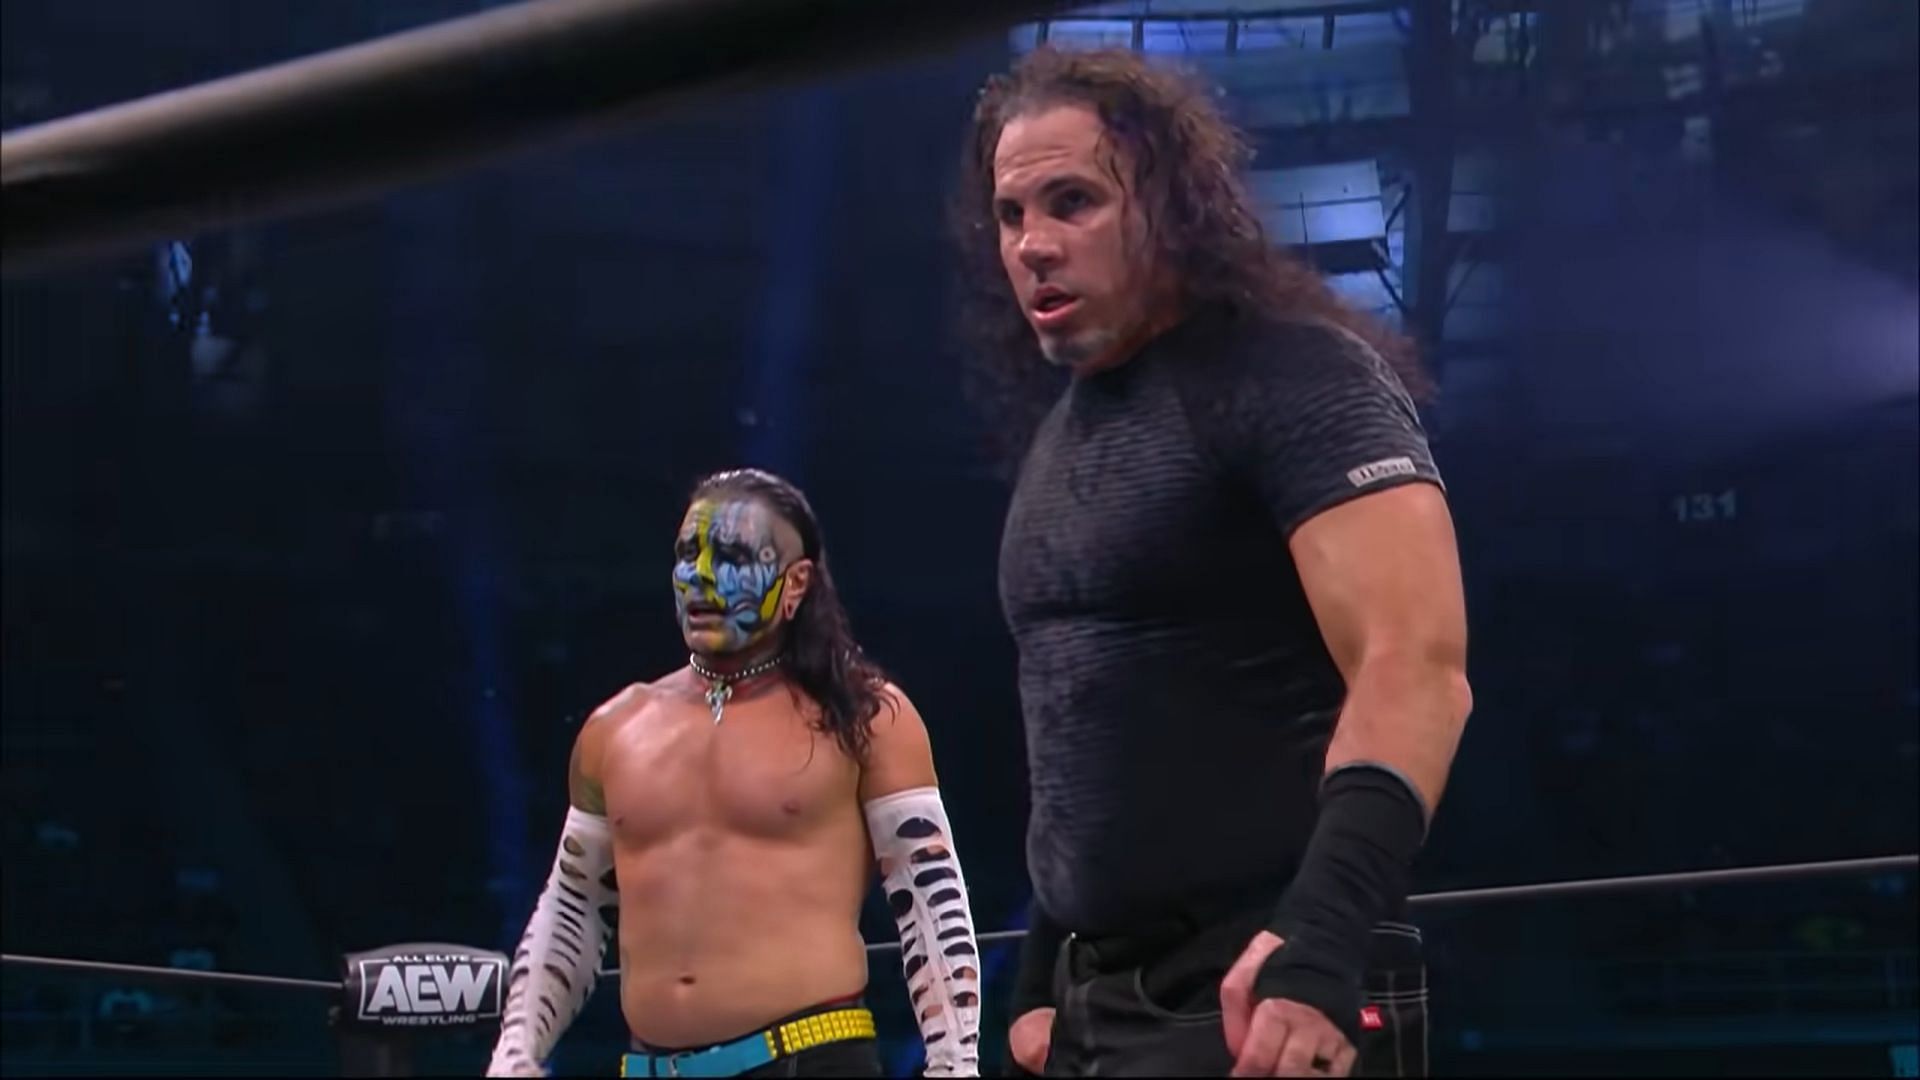 The Hardys are legends of tag team wrestling